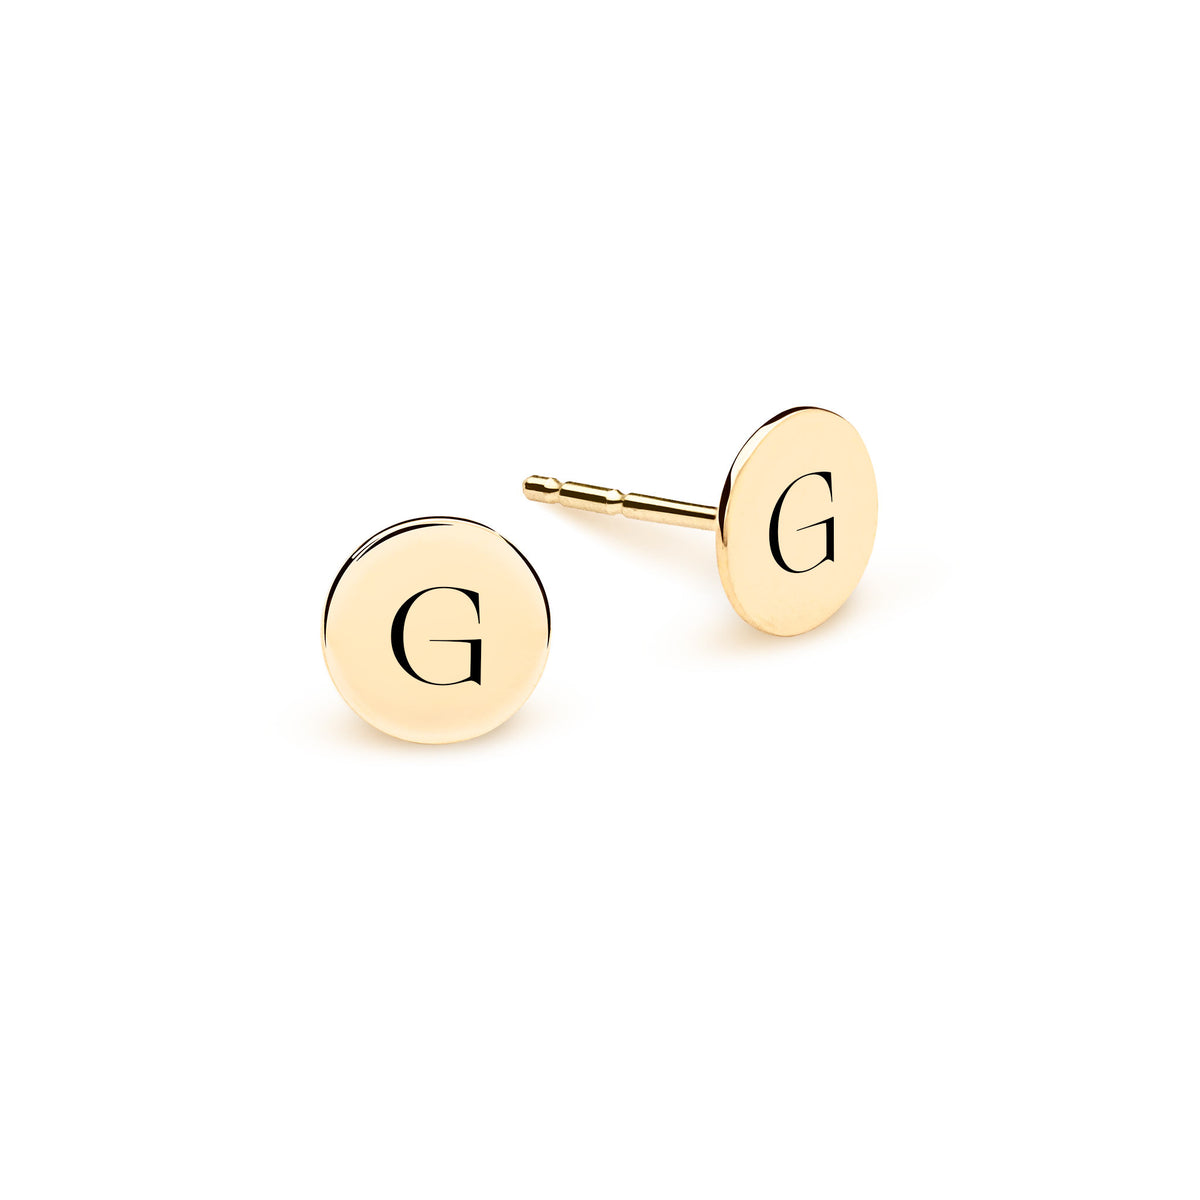 Buy 1 Gram Gold Plated Ad Stone Impon Earrings Online Shopping